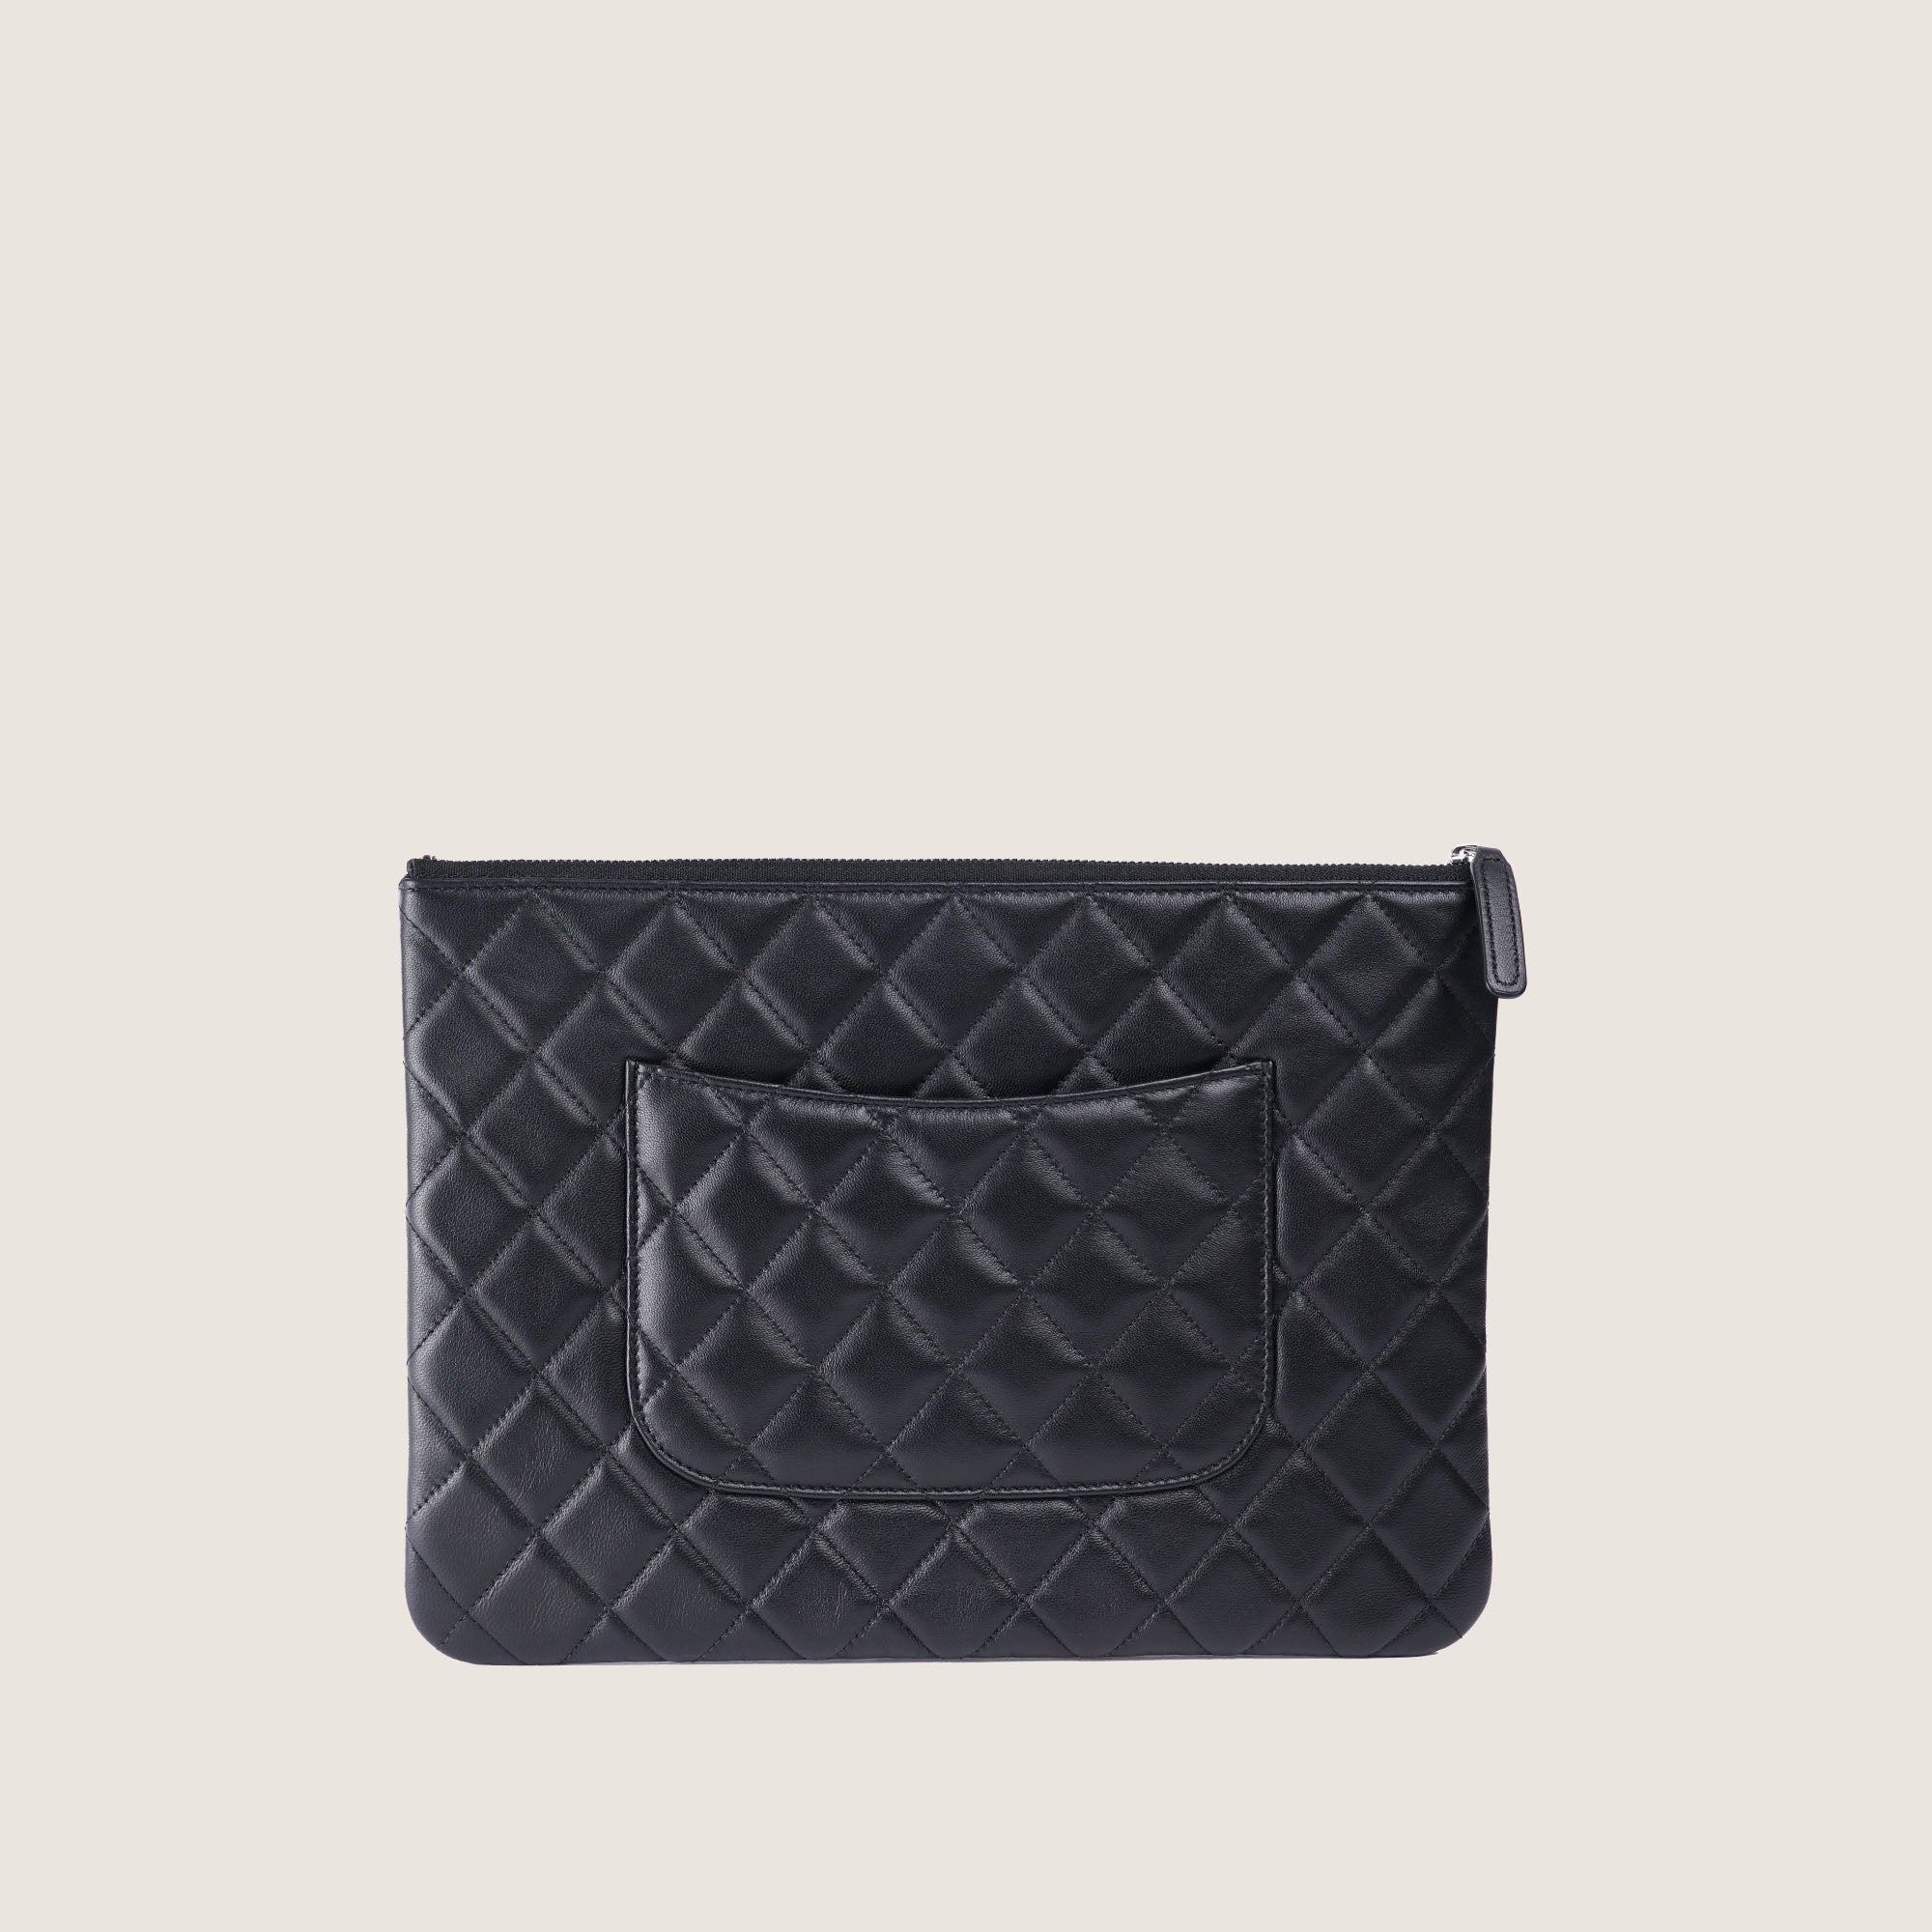 Chanel Pouch Black Lambskin - CHANEL - Affordable Luxury